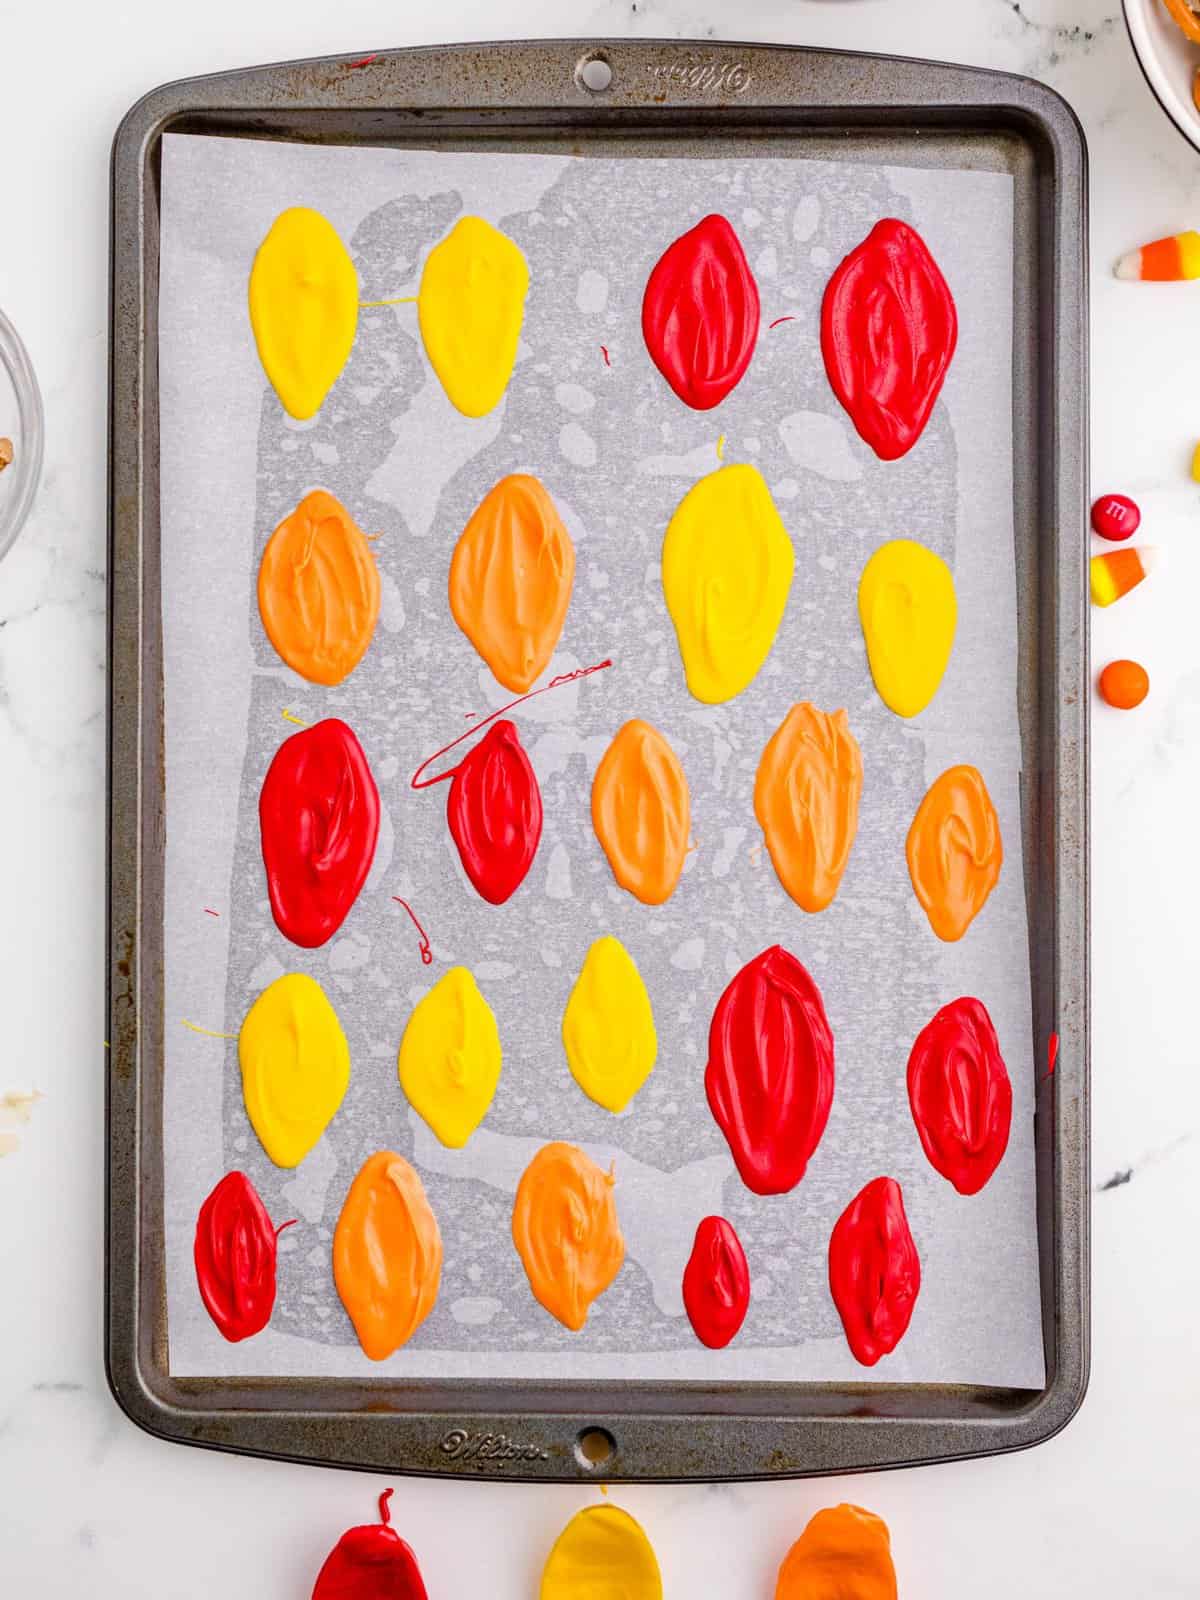 Candy melts spread into feather shapes on parchment lined baking sheet.